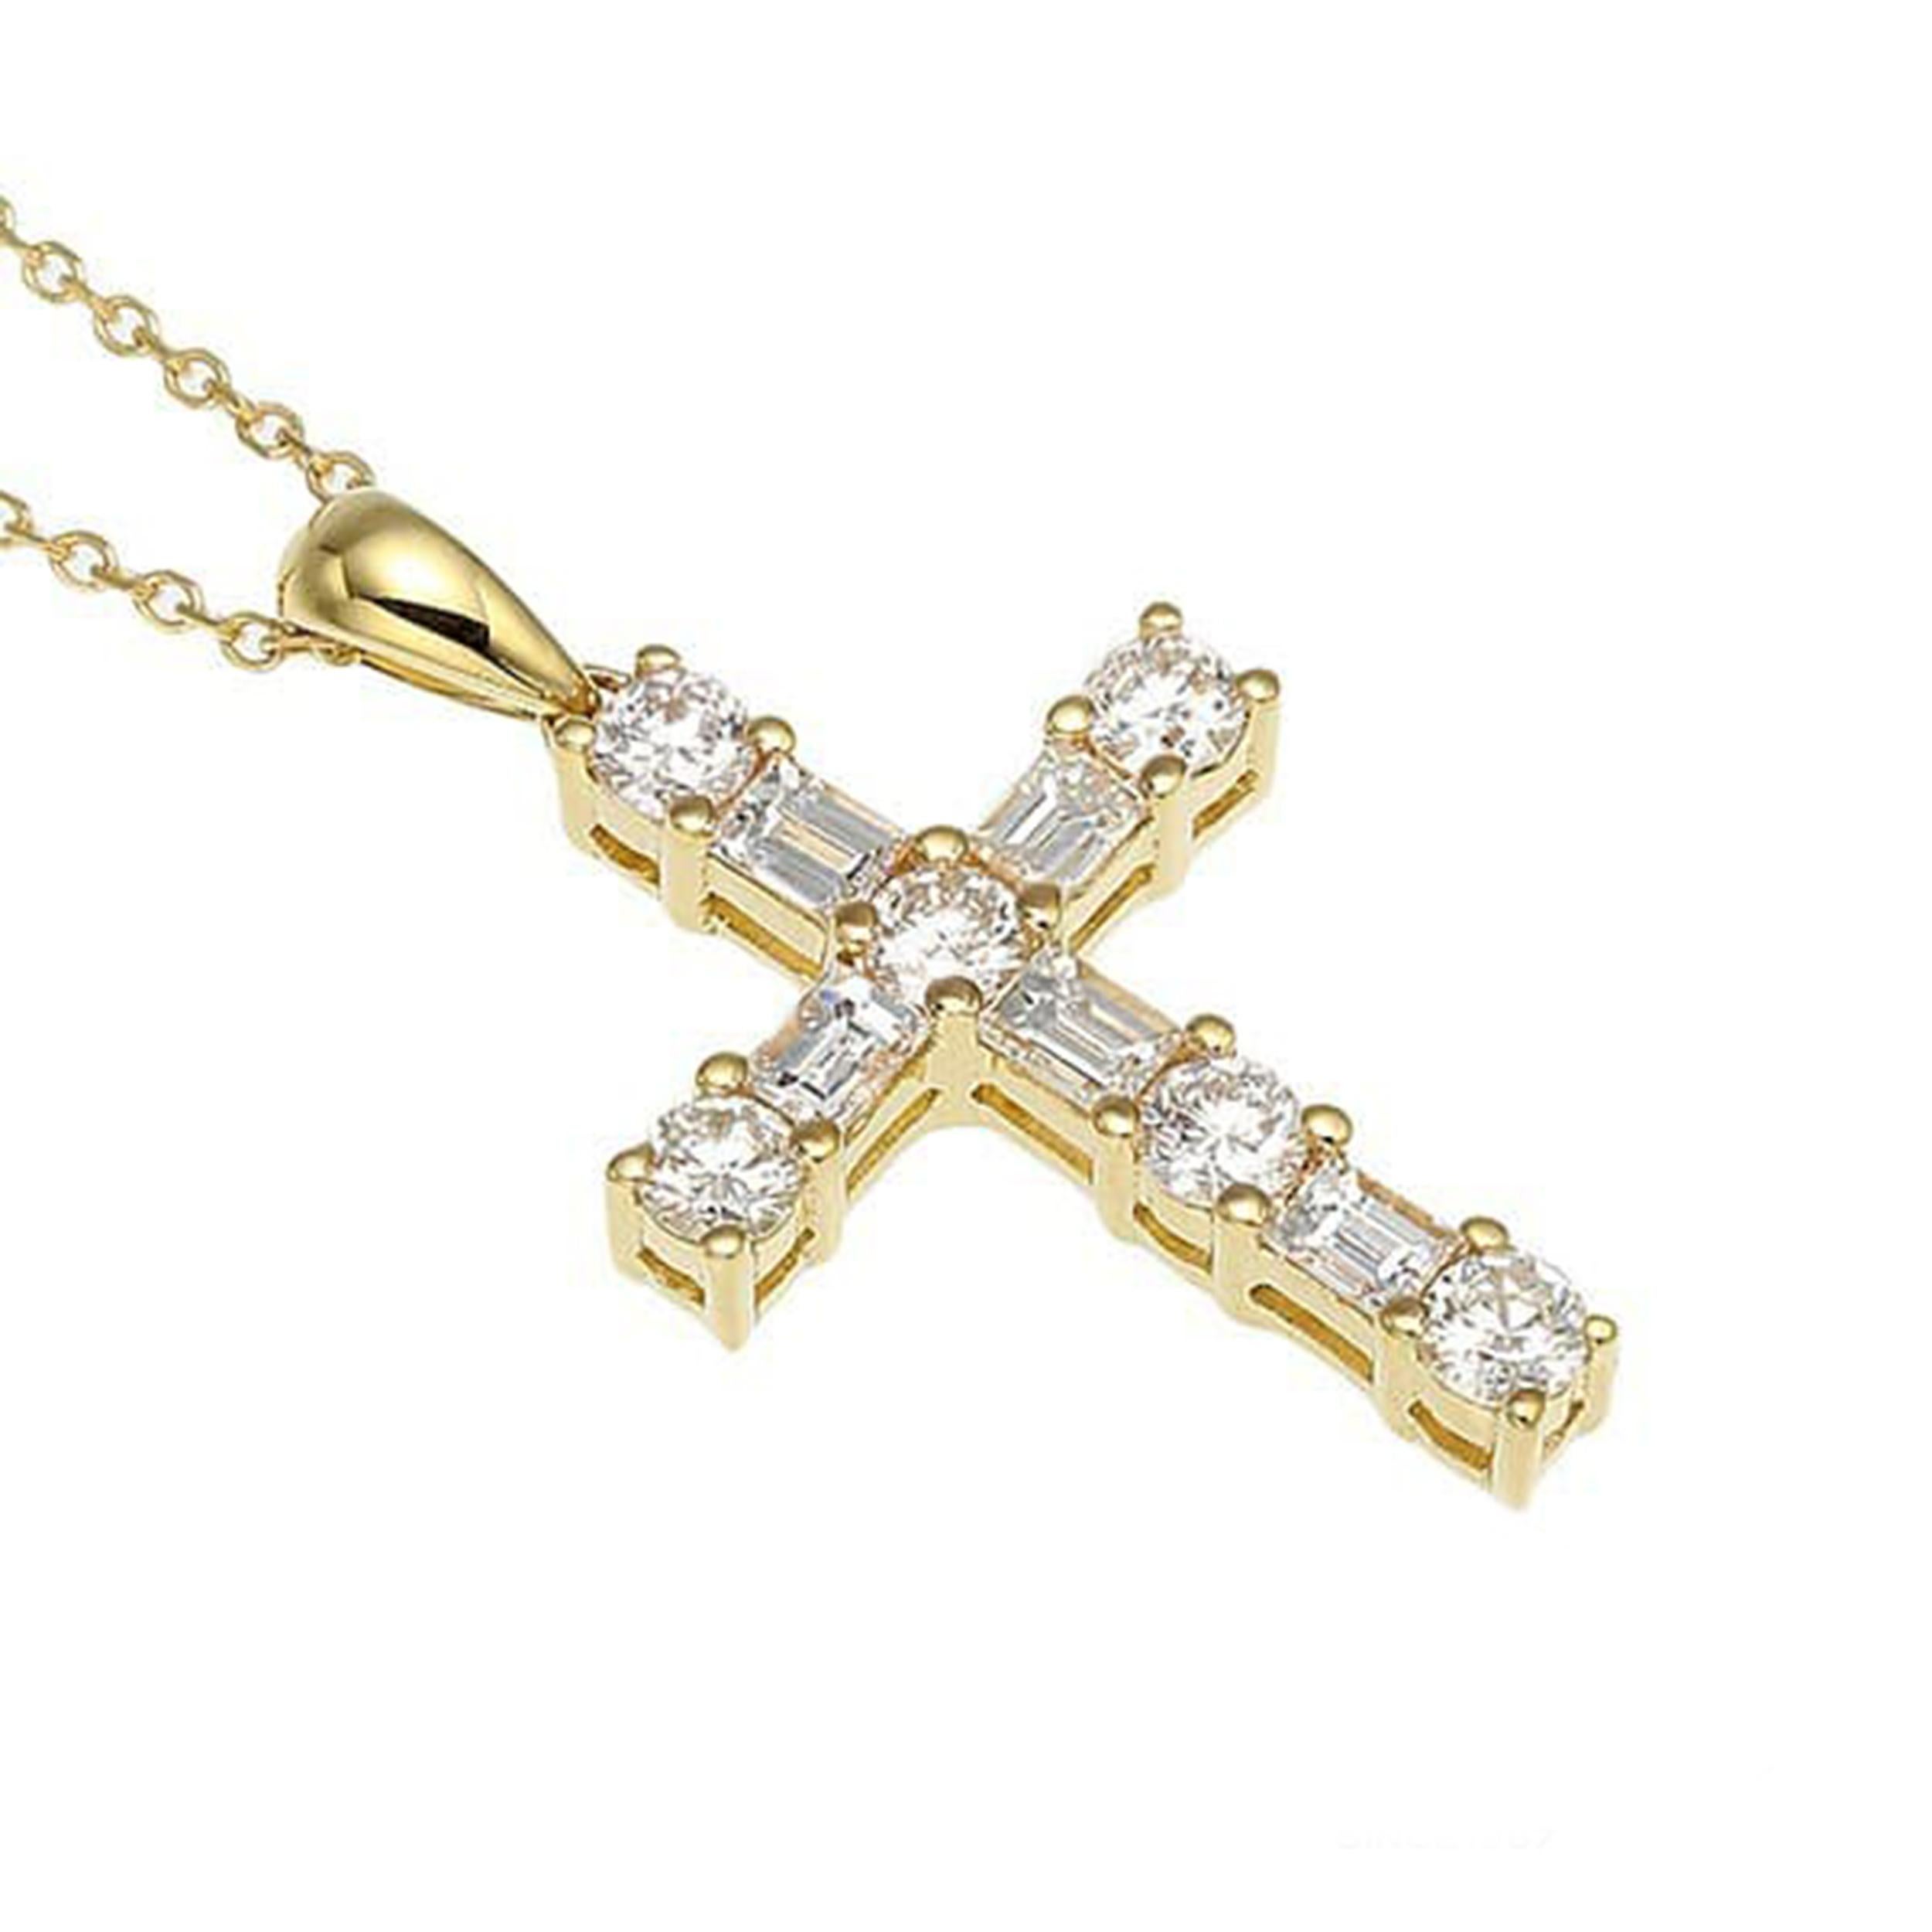 Elevate your style with this elegant 18K yellow gold diamond cross pendant necklace. Crafted with exquisite detail, this timeless piece features a sparkling diamond at its center, weighing 0.36 carats. The pendant measures approximately 19.3mm x